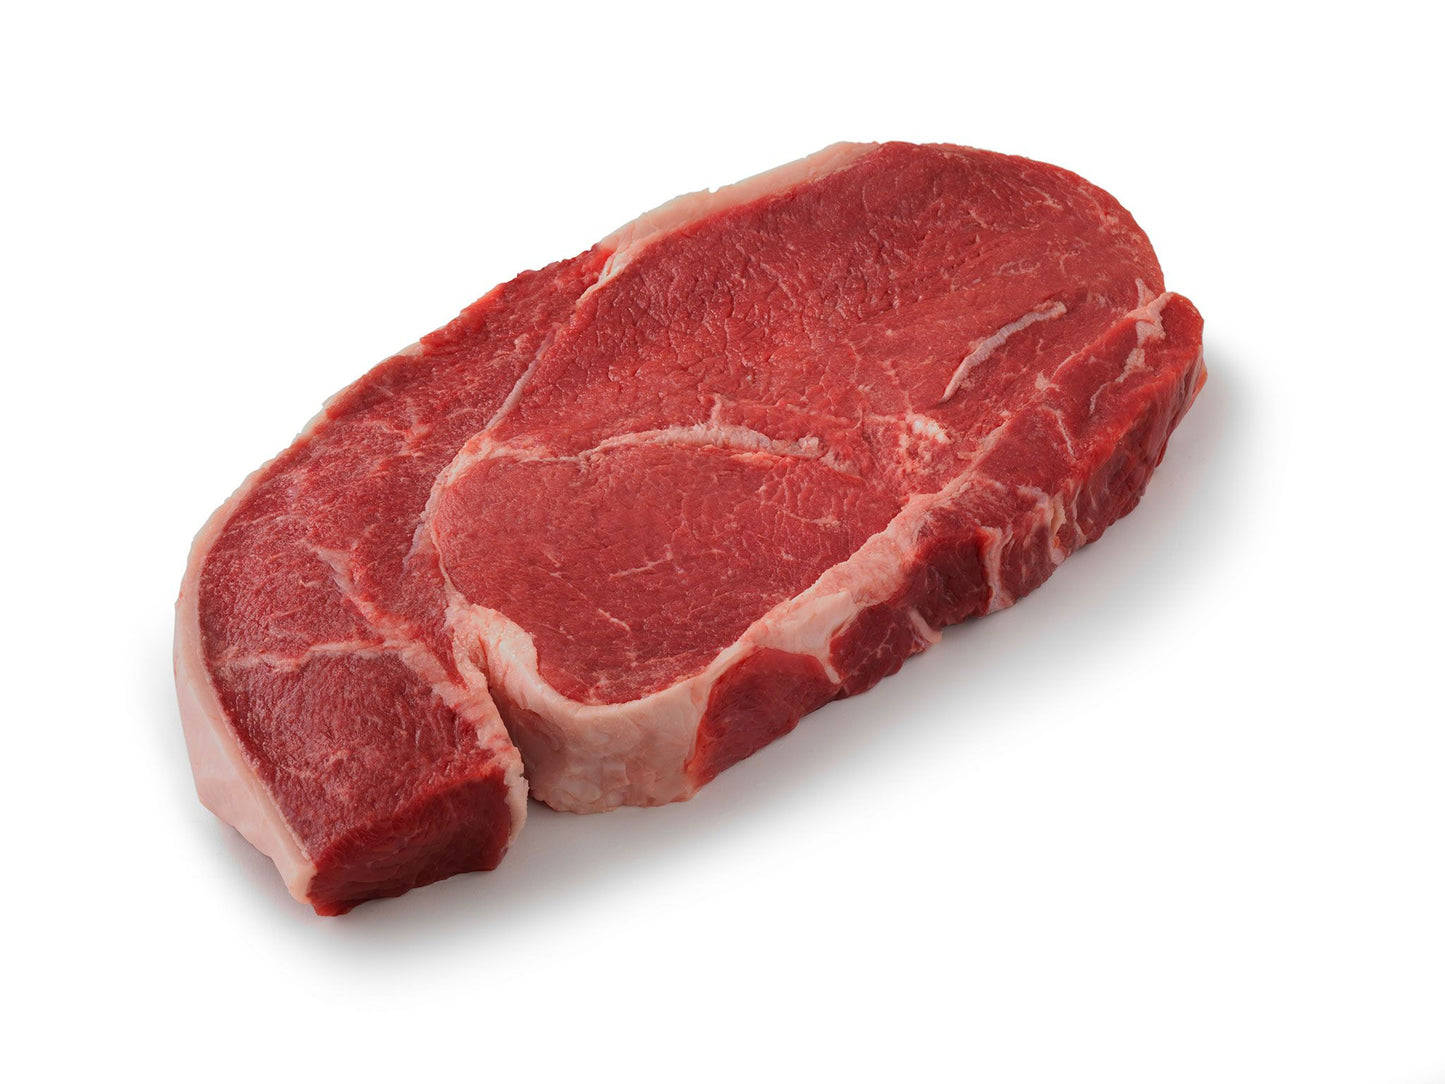 Top Sirloin Steaks Grass Finished (1 - 3 lbs) $12lb